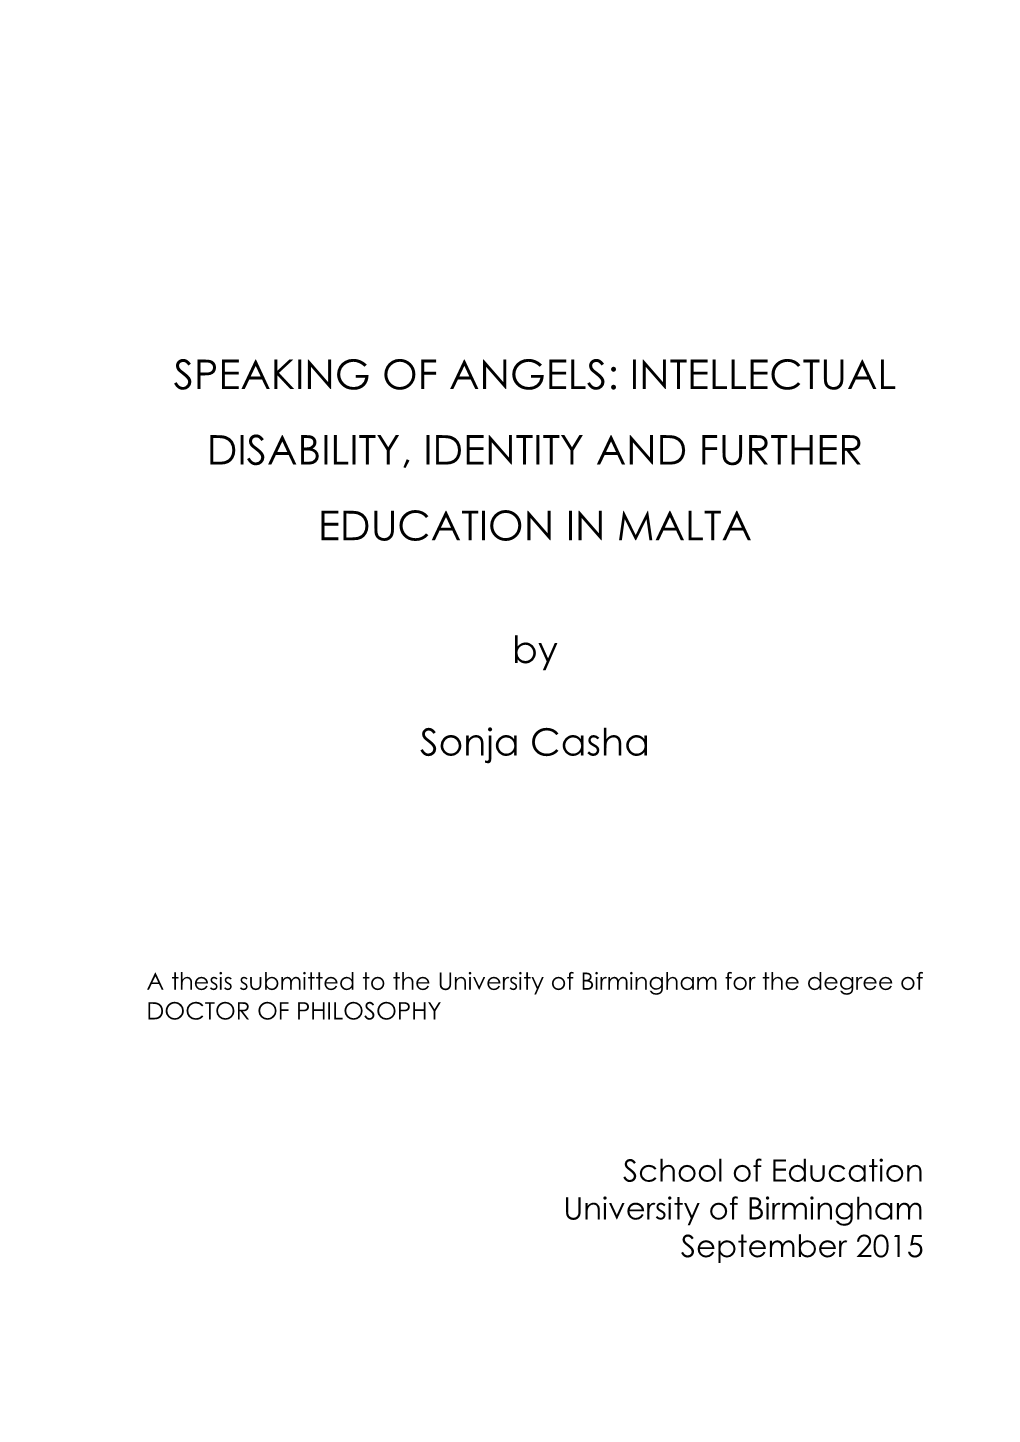 Intellectual Disability, Identity and Further Education in Malta